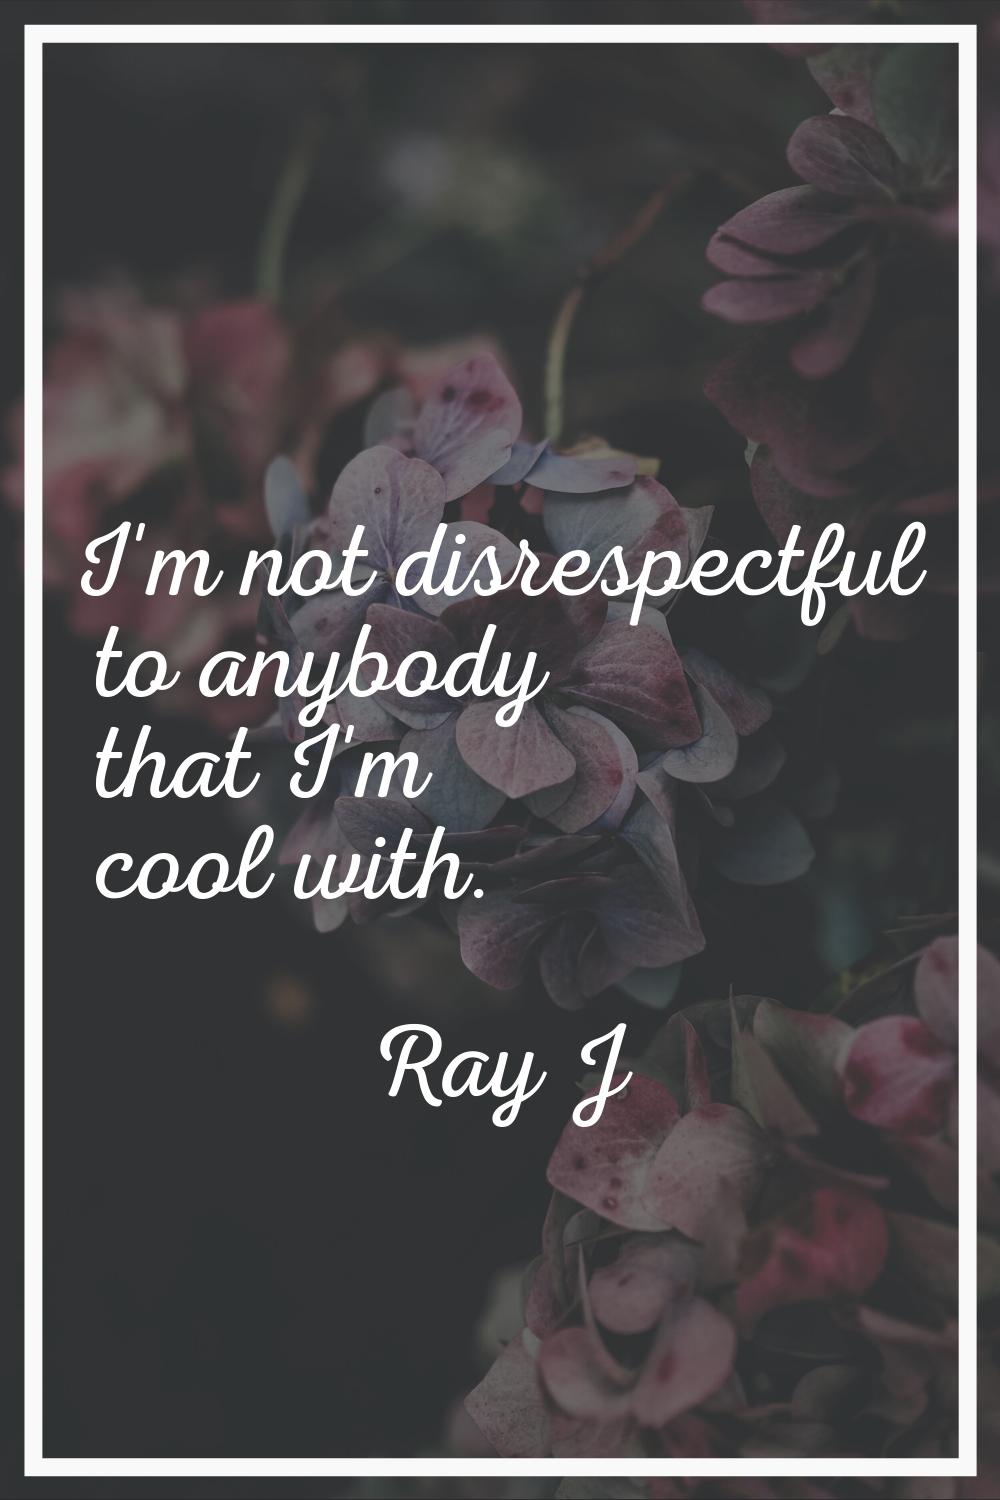 I'm not disrespectful to anybody that I'm cool with.